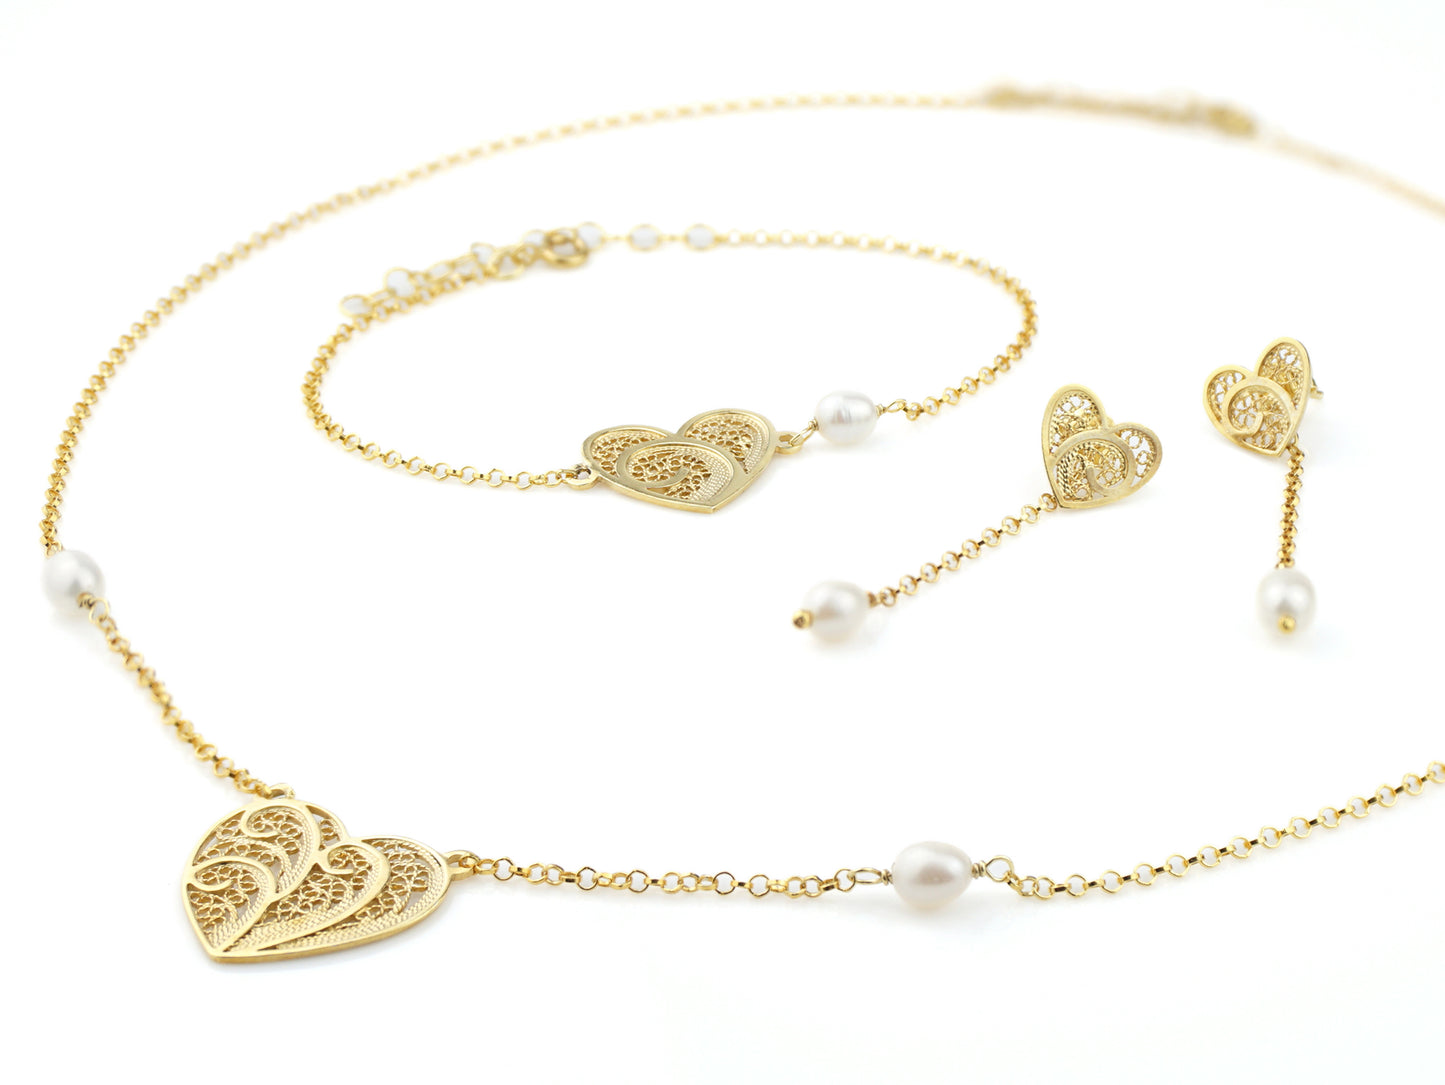 Earrings + Bracelet + Heart Necklace Set with Pearls, Portuguese Filigree, 925 Sterling Silver, Gold